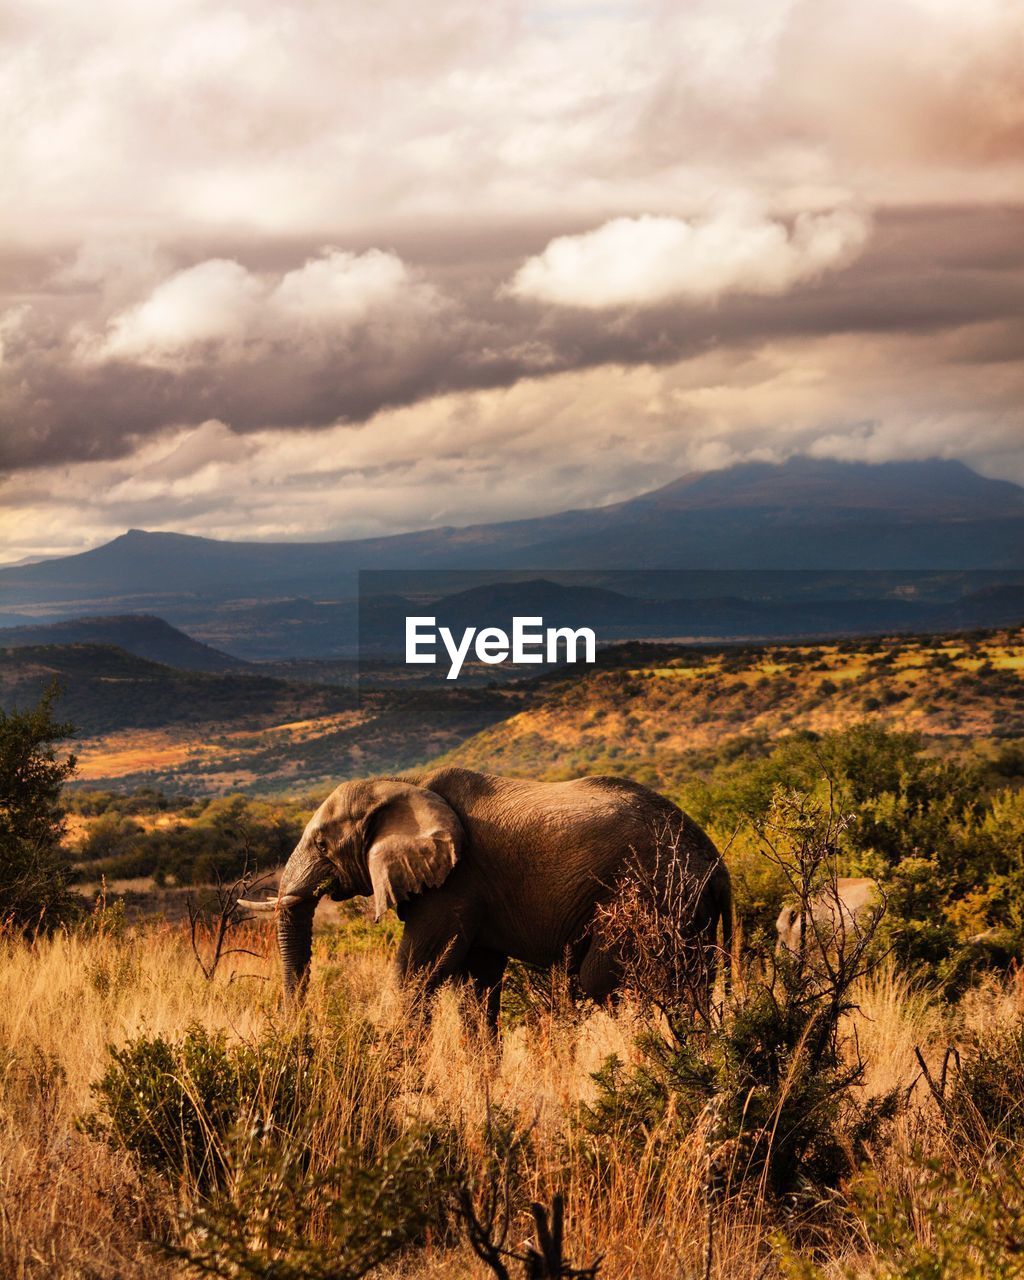 African elephant on grassy field by mountains against cloudy sky